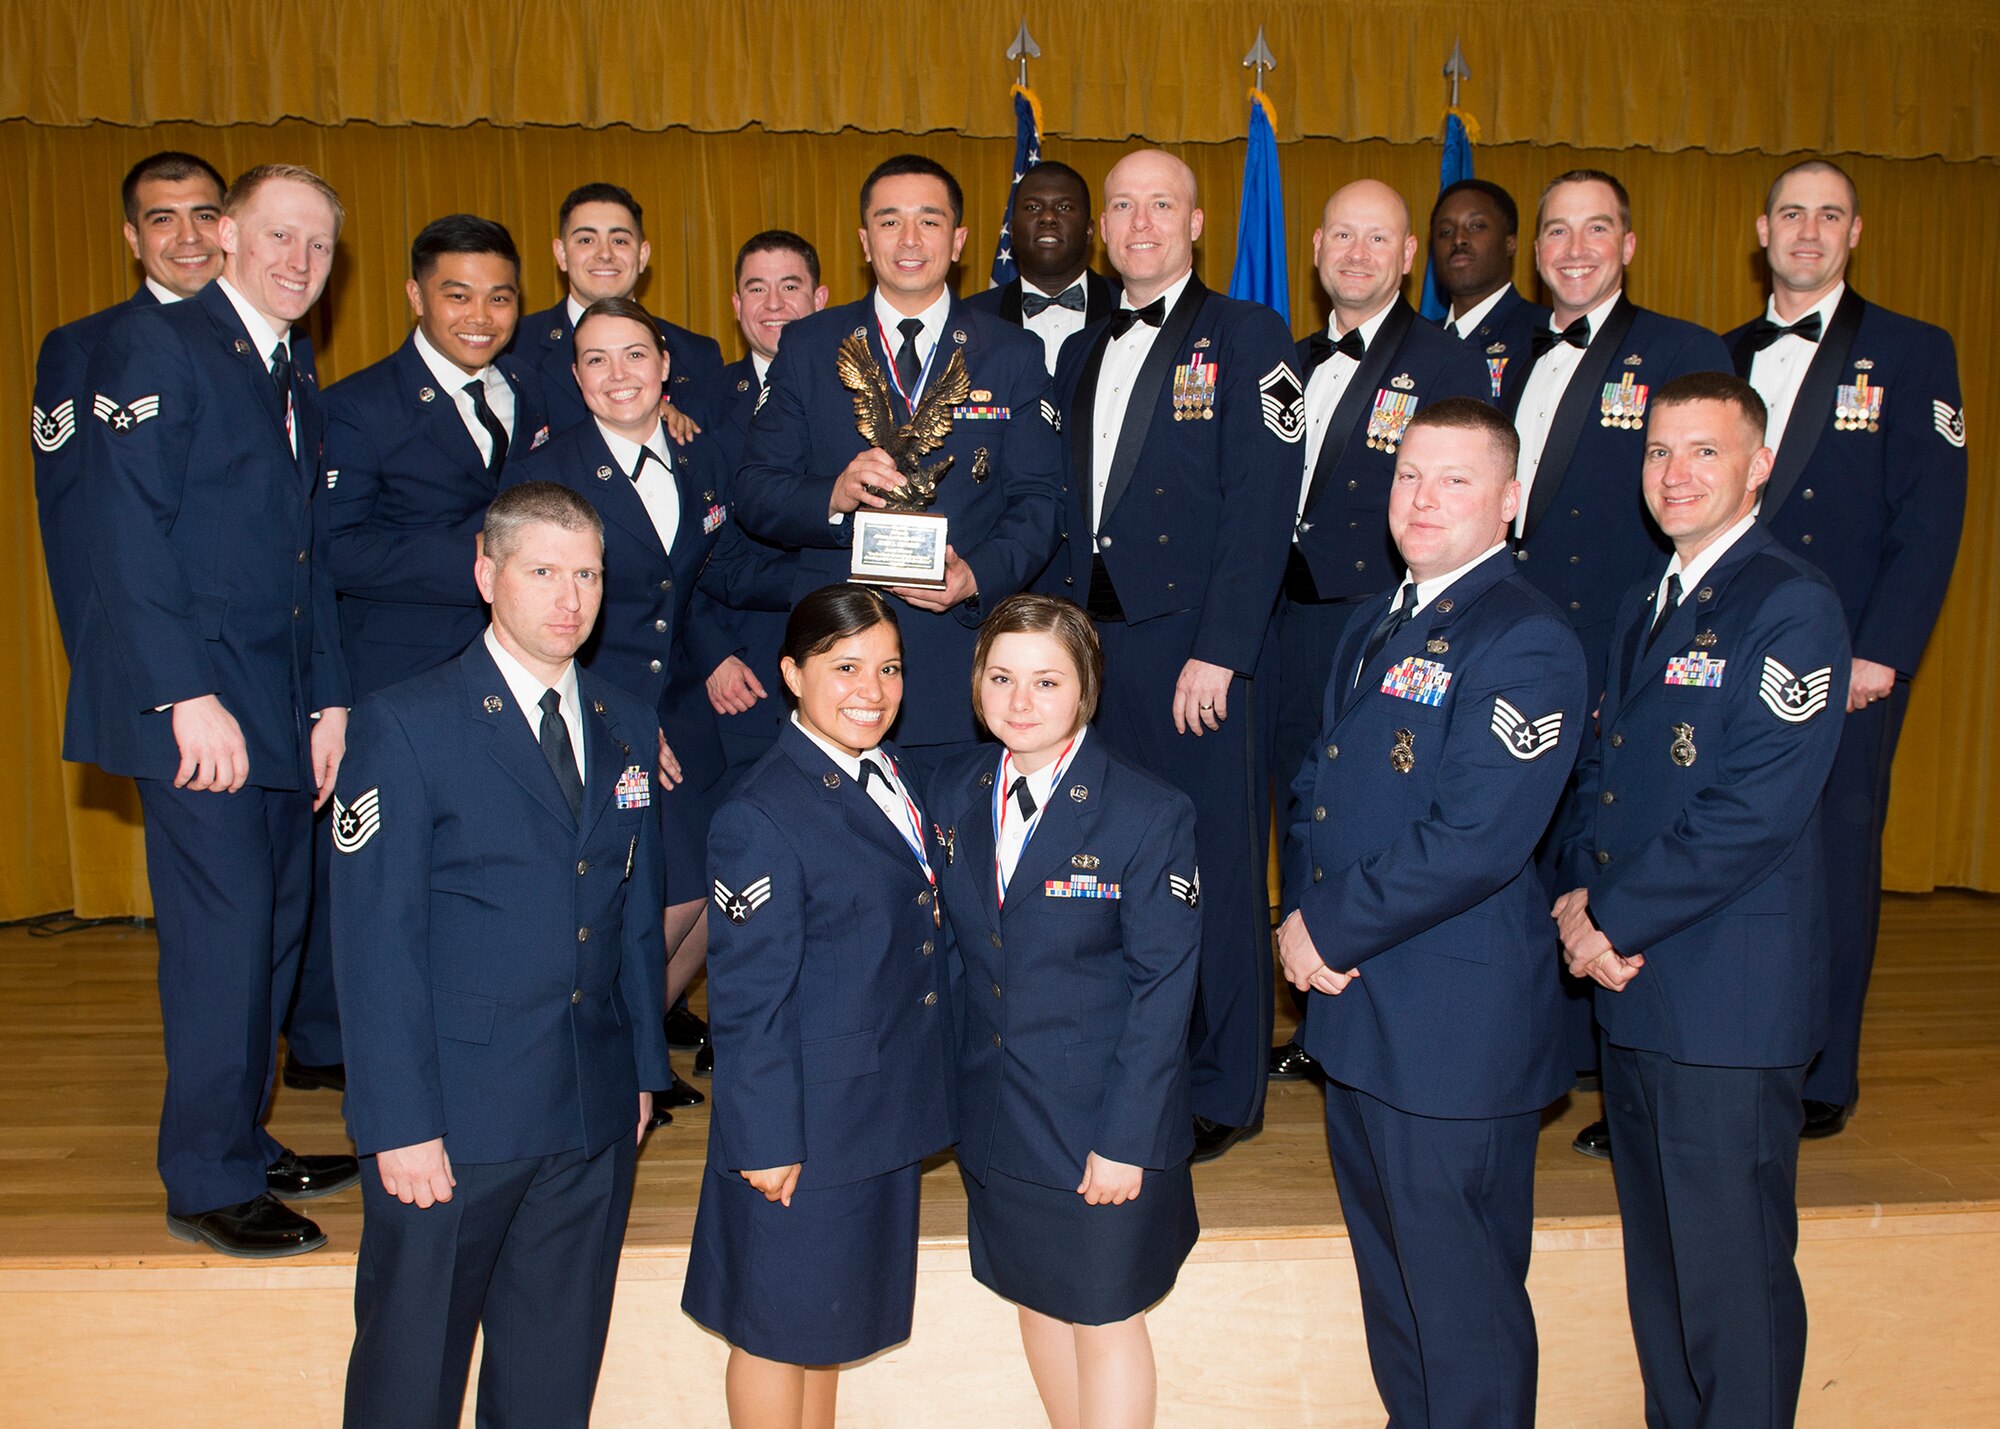 The Airman Leadership School congratulated a new class of graduates Feb. 11 during a ceremony at Club Muroc. (U.S. Air Force photo by Kevin North)